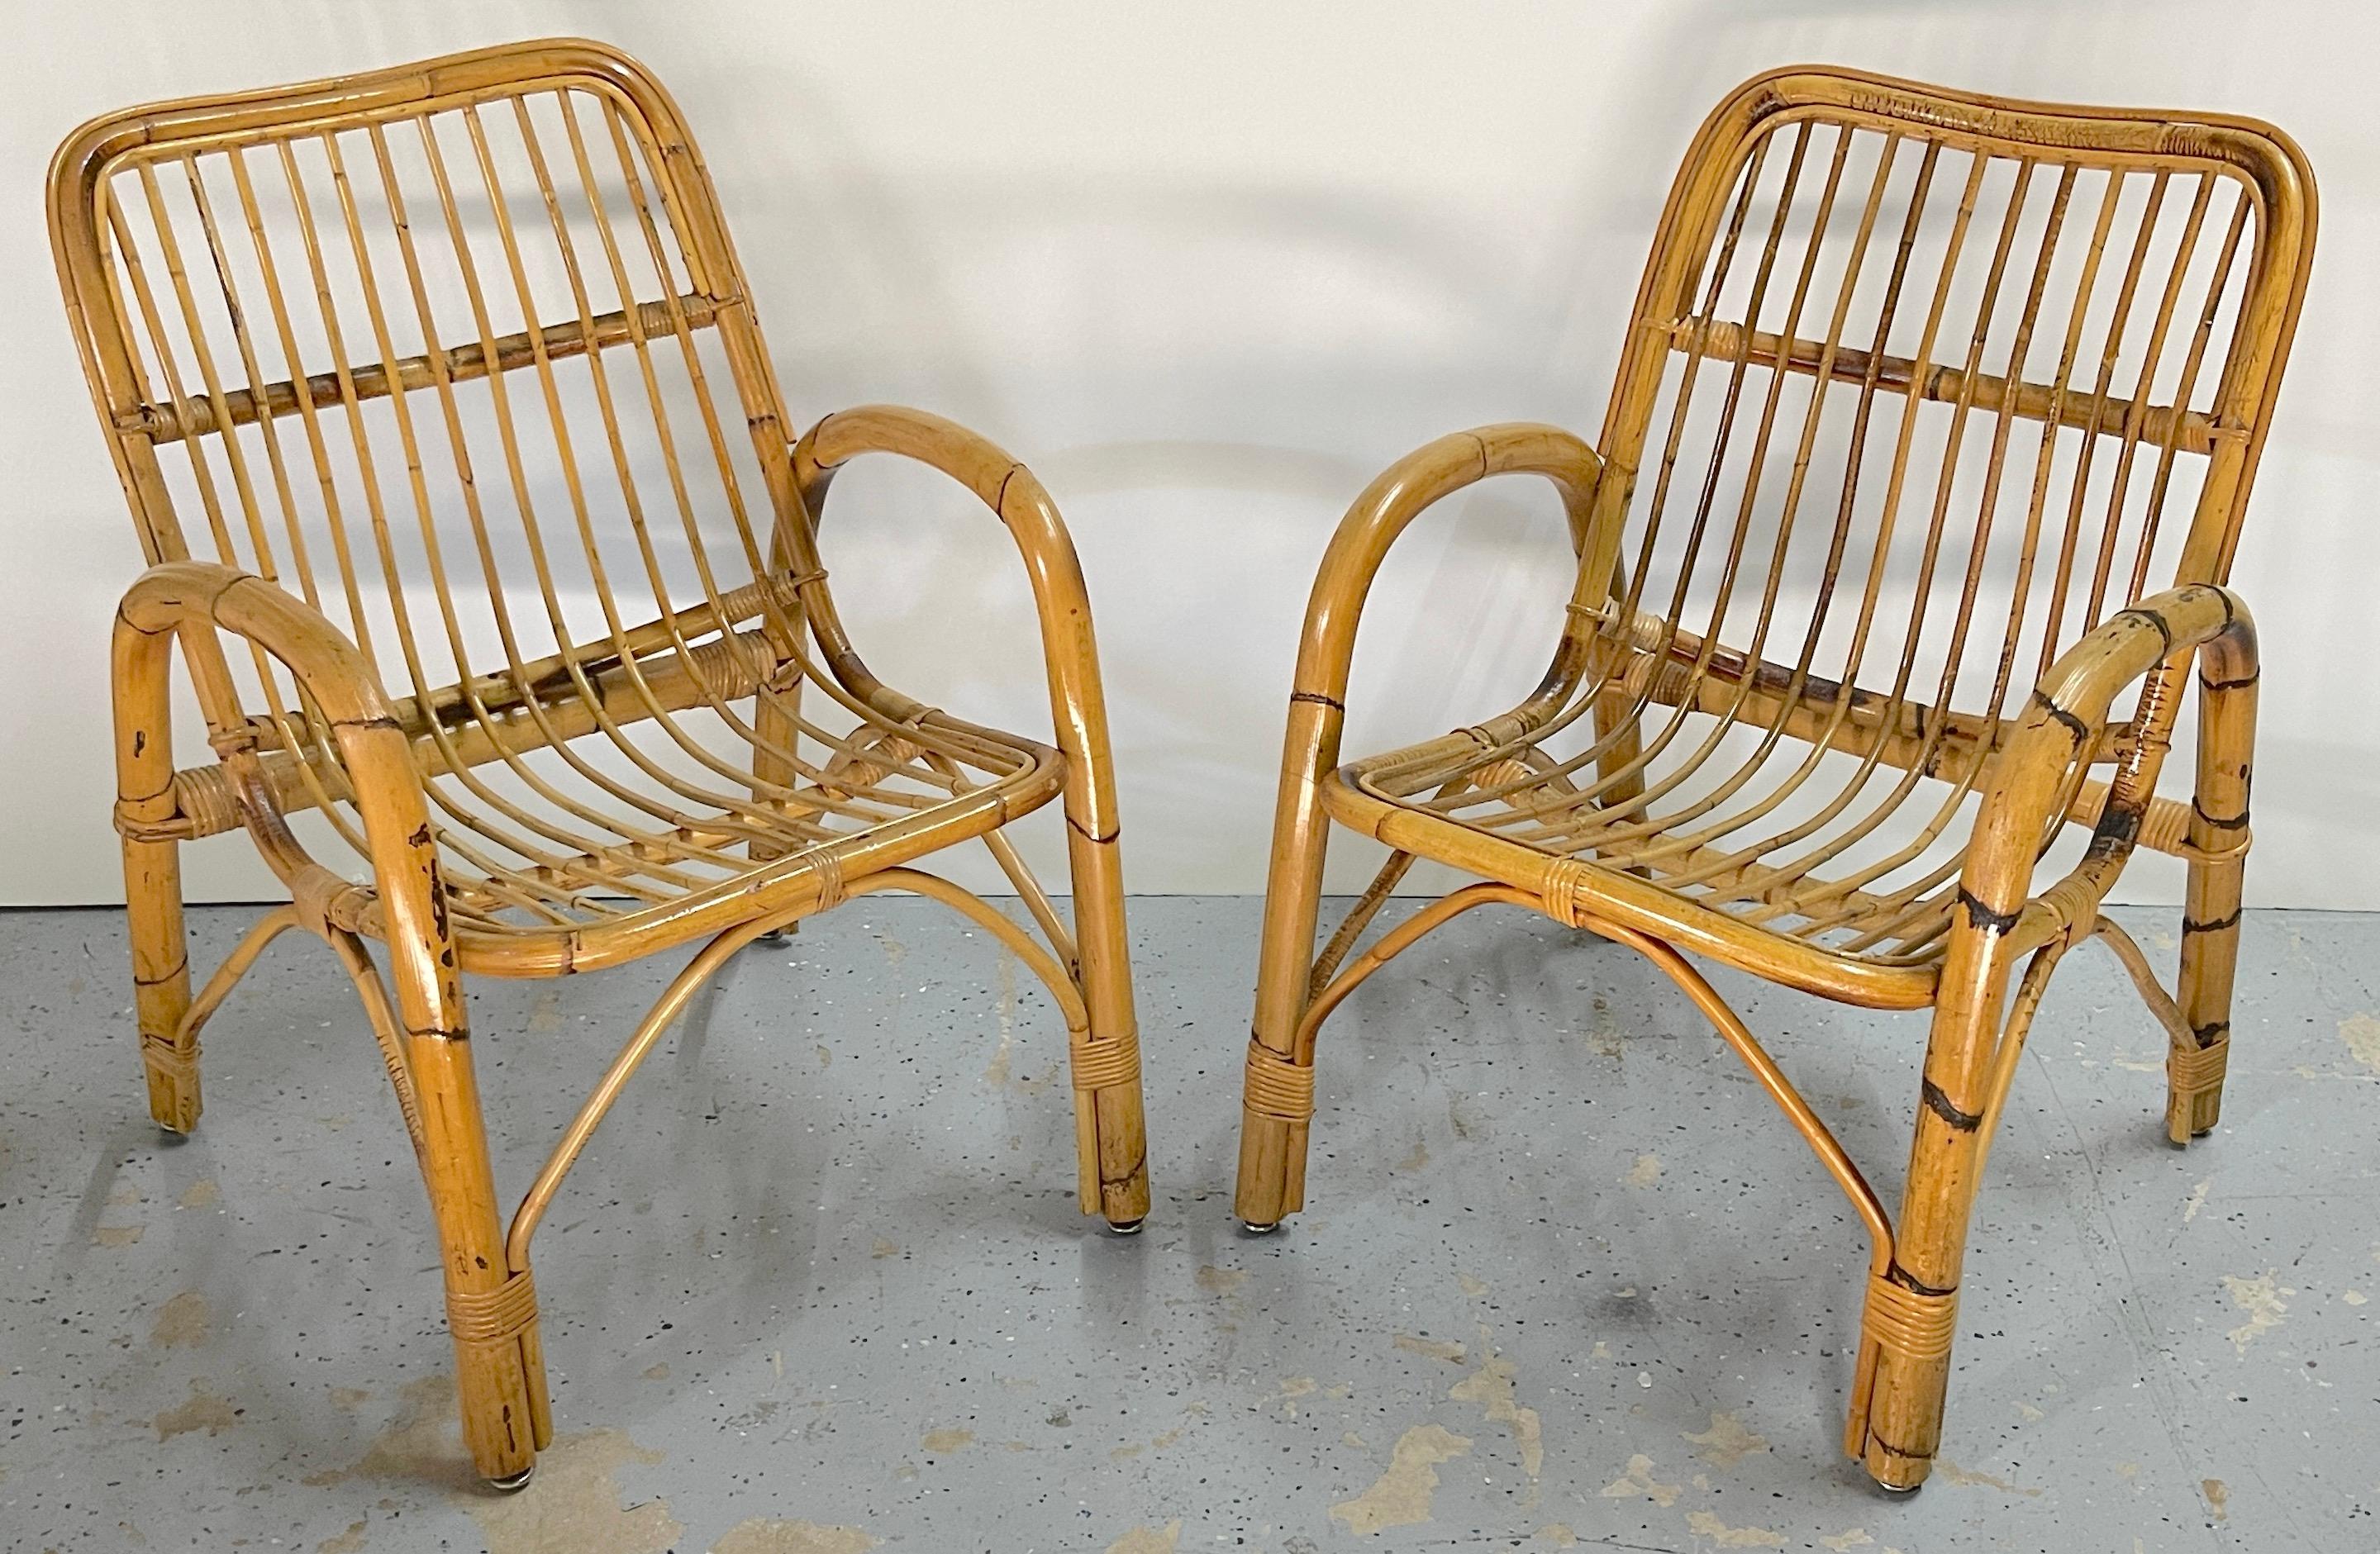 Pair of 1970s Italian Bamboo Armchairs, Style of Franco Albini 
Italy, Circa 1970s

A great pair of Italian bentwood bamboo arm/club chairs, each one in superb condition, with warm original finish/ patina. Ready to place. 
Arm height is 22.5